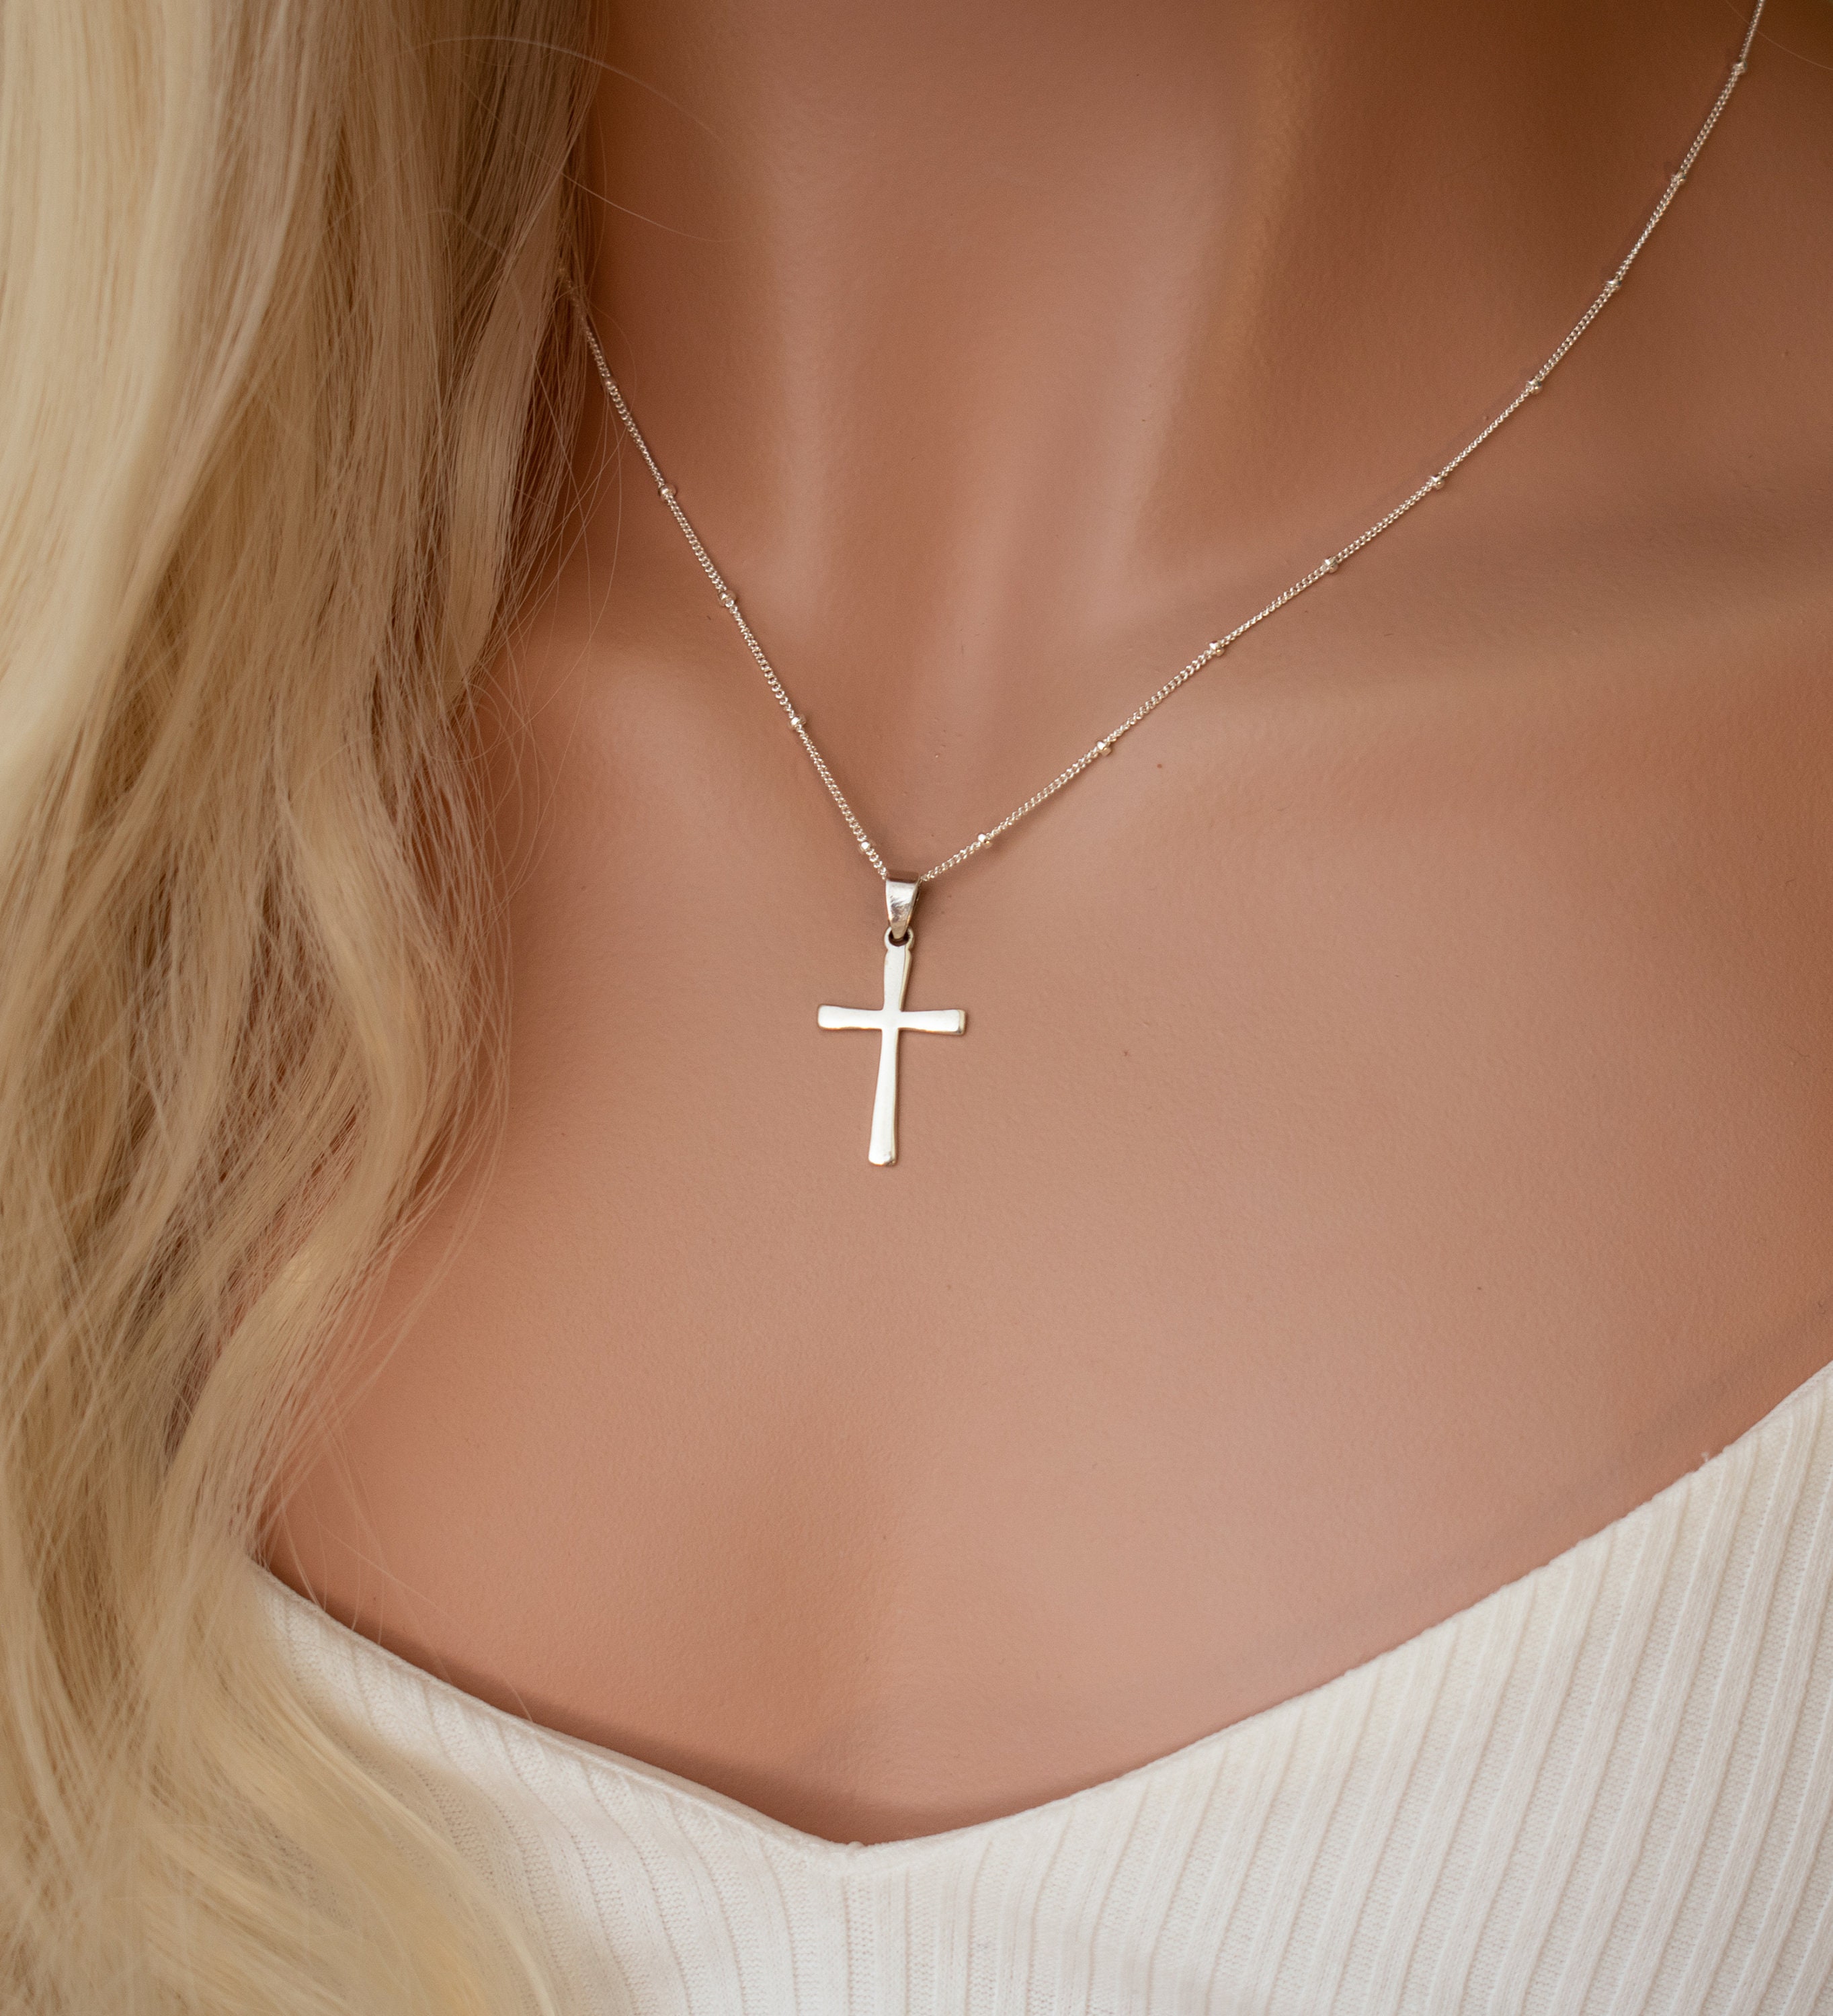 Simple Layer Necklace Chains, Girl / Women Collar Pedant, Cross Choker  Chain, Fake Silver Gold Plated Necklaces, Womens Neck Accessory